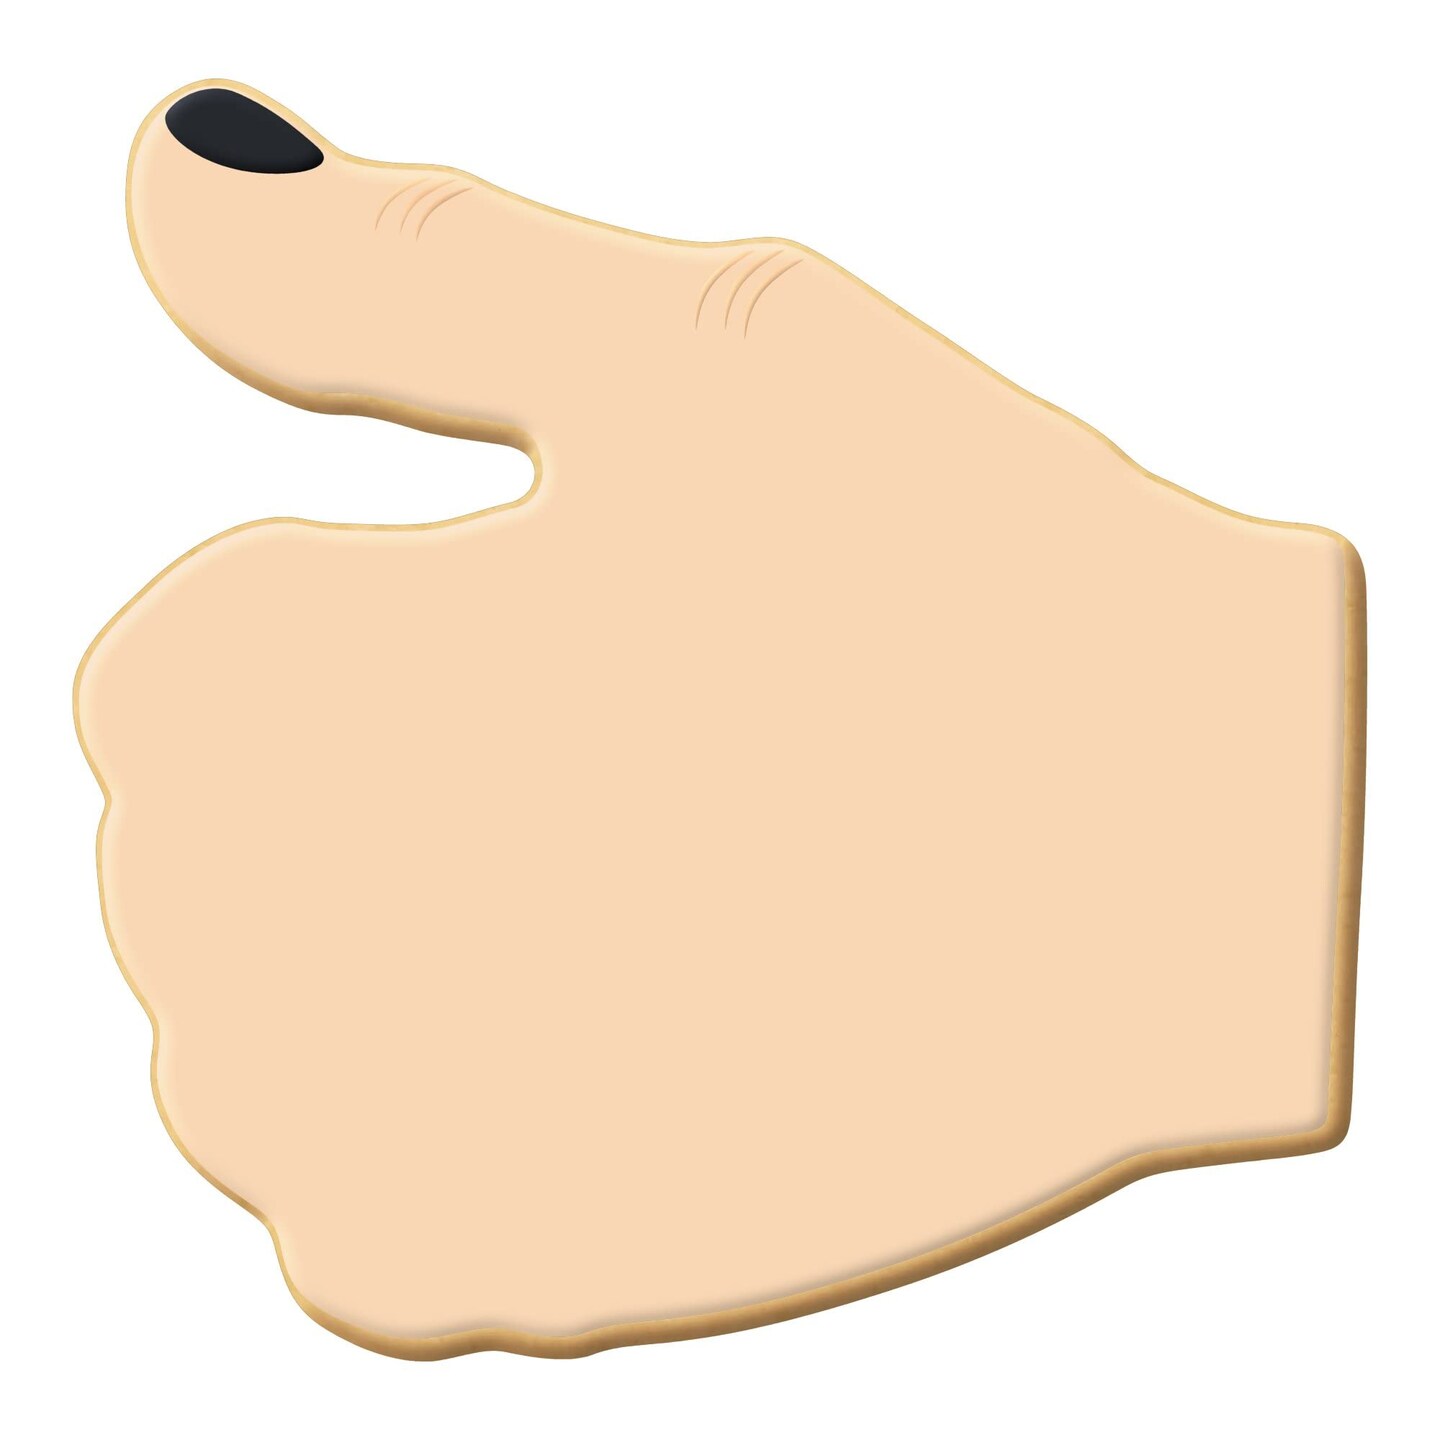 Thumbs Up Aggie Cookie Cutter 4 in B1606, CookieCutter.com, Tin Plated Steel, Handmade in the USA